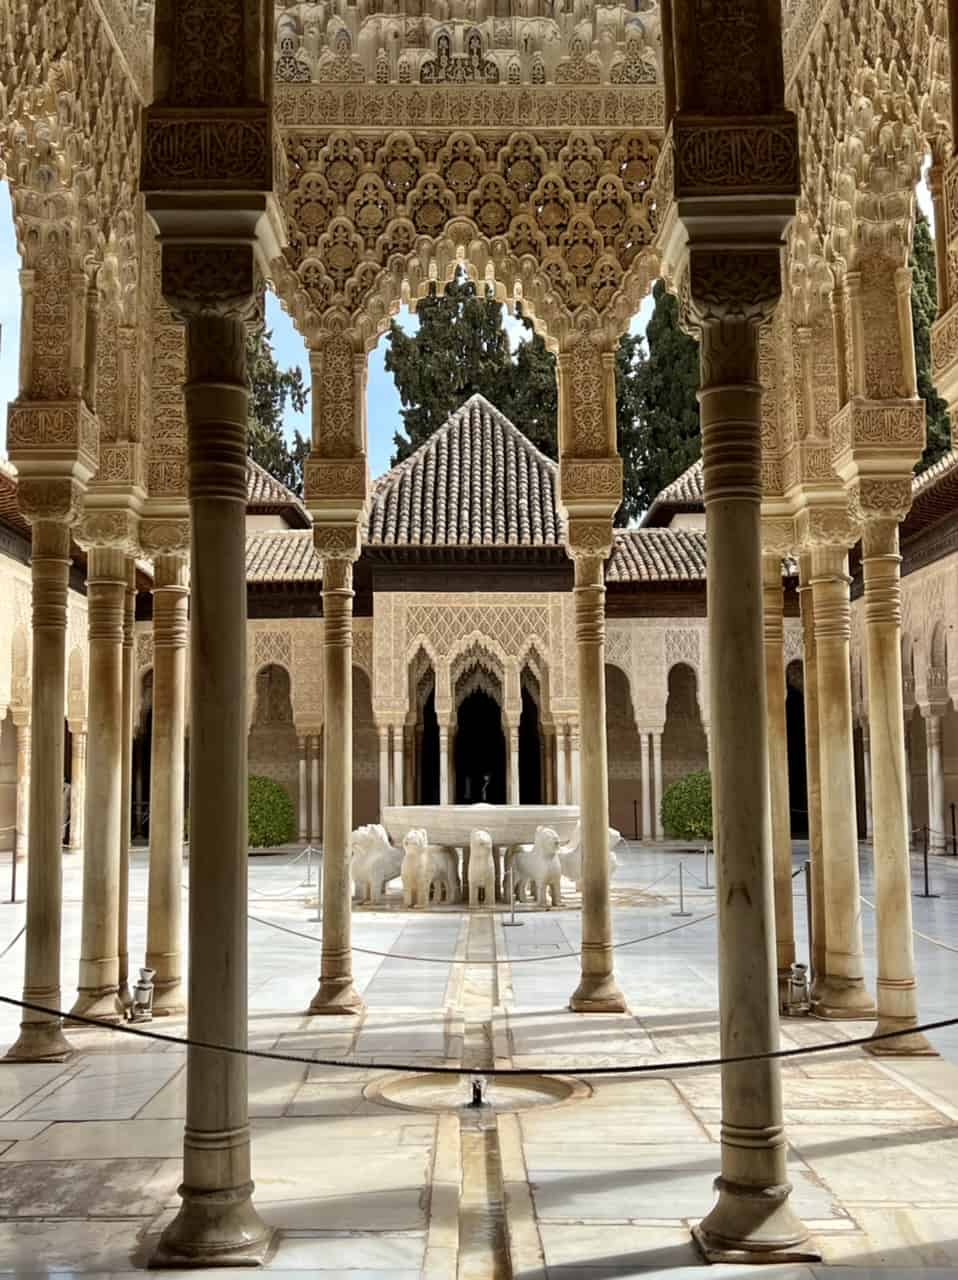 Courtyard of the Lions in the Nasrid Palace